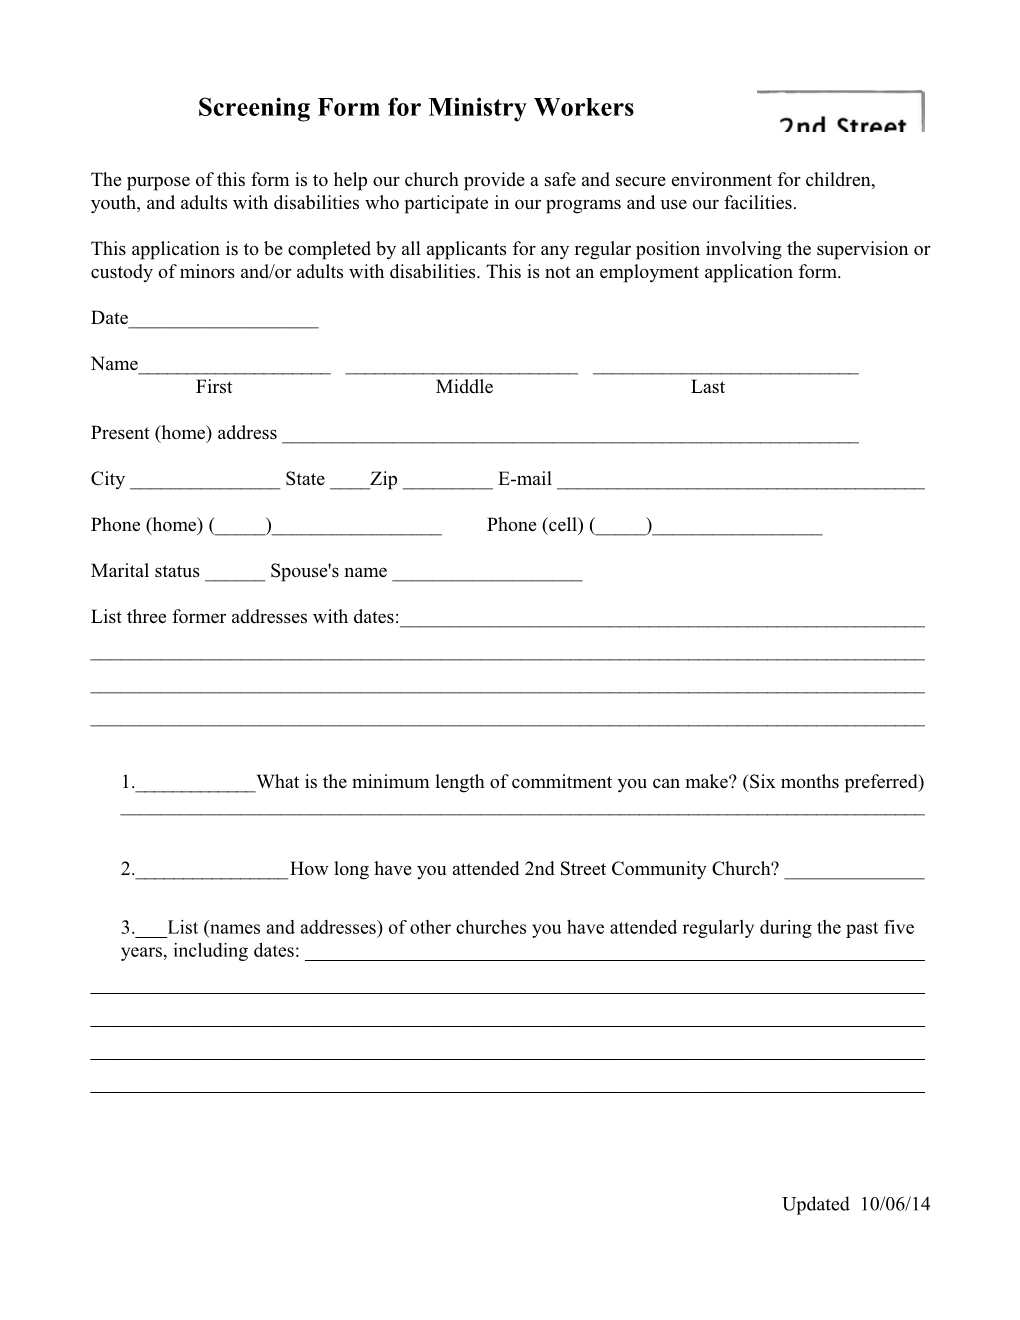 Screening Form Forministry Workers